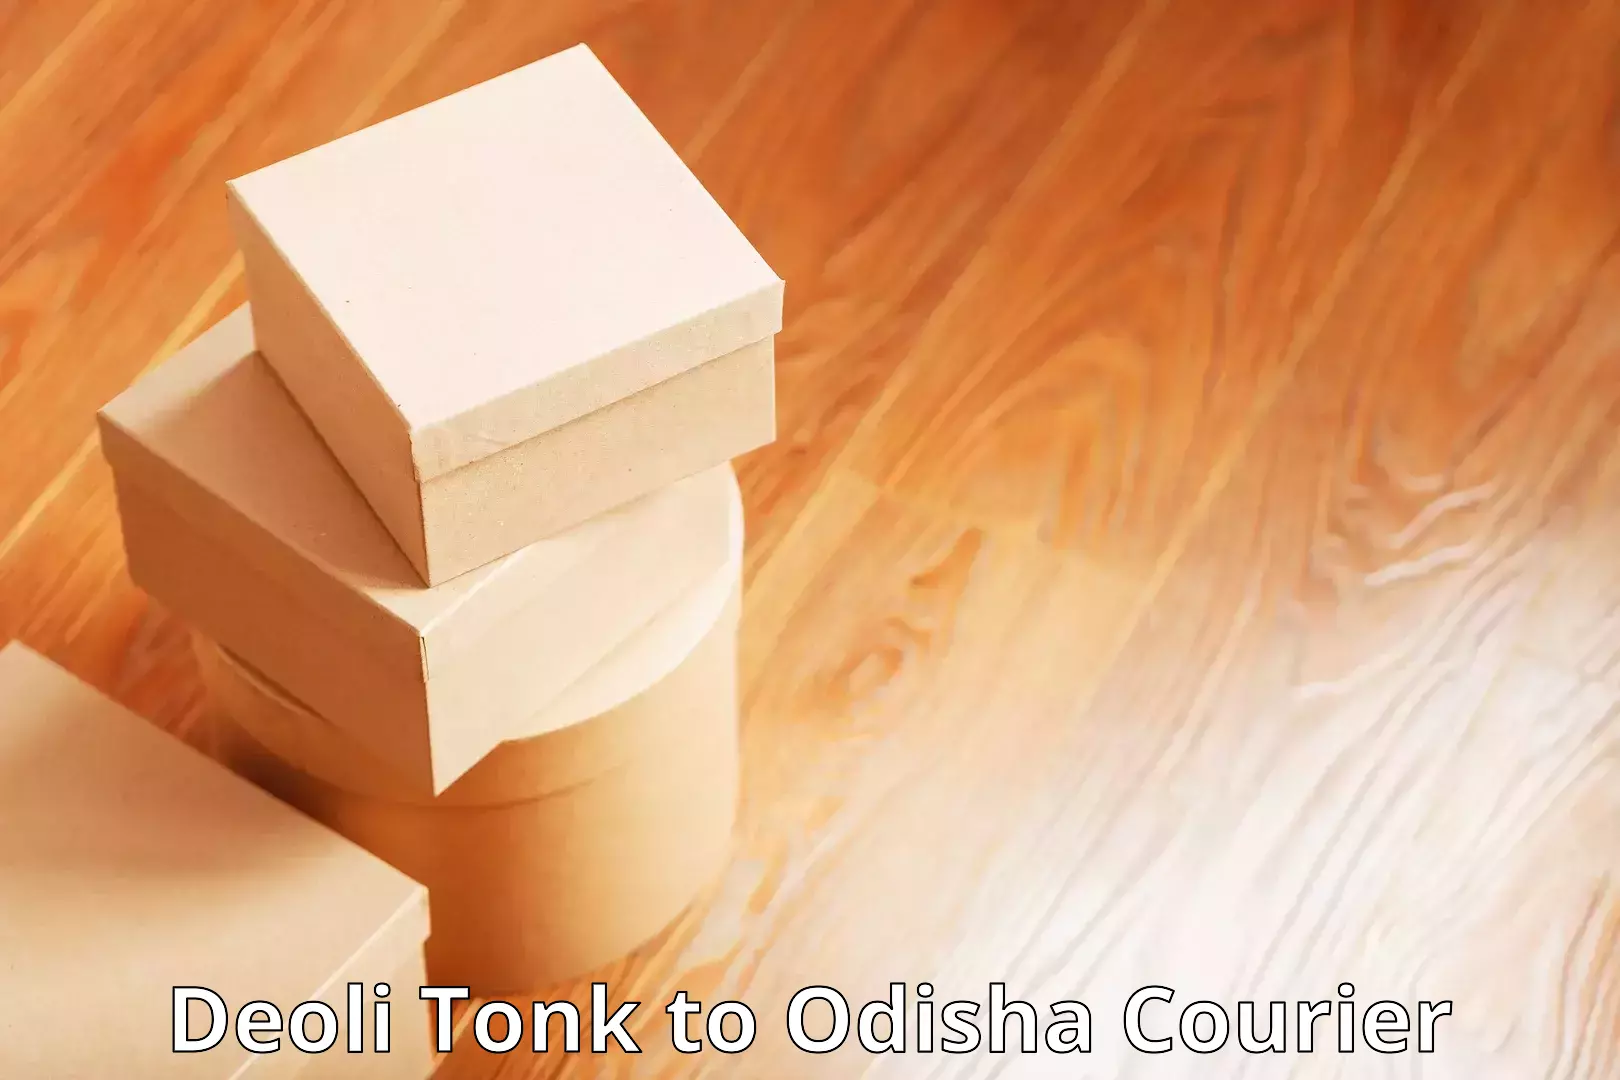 Corporate courier solutions Deoli Tonk to Odisha